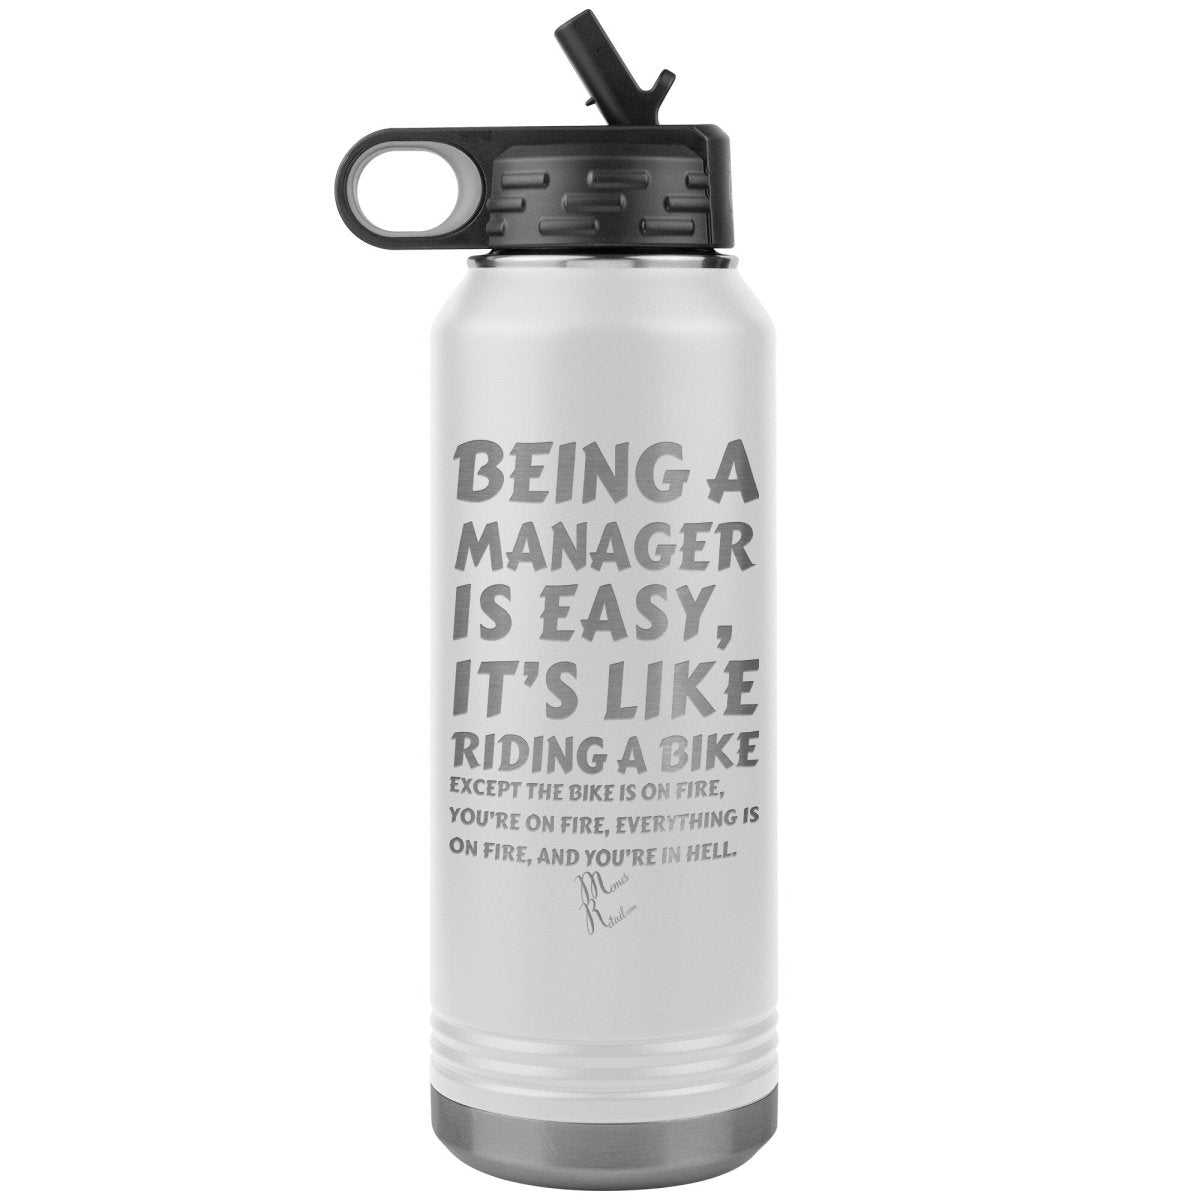 Being a manager is easy….32oz Water Tumbler, White - MemesRetail.com